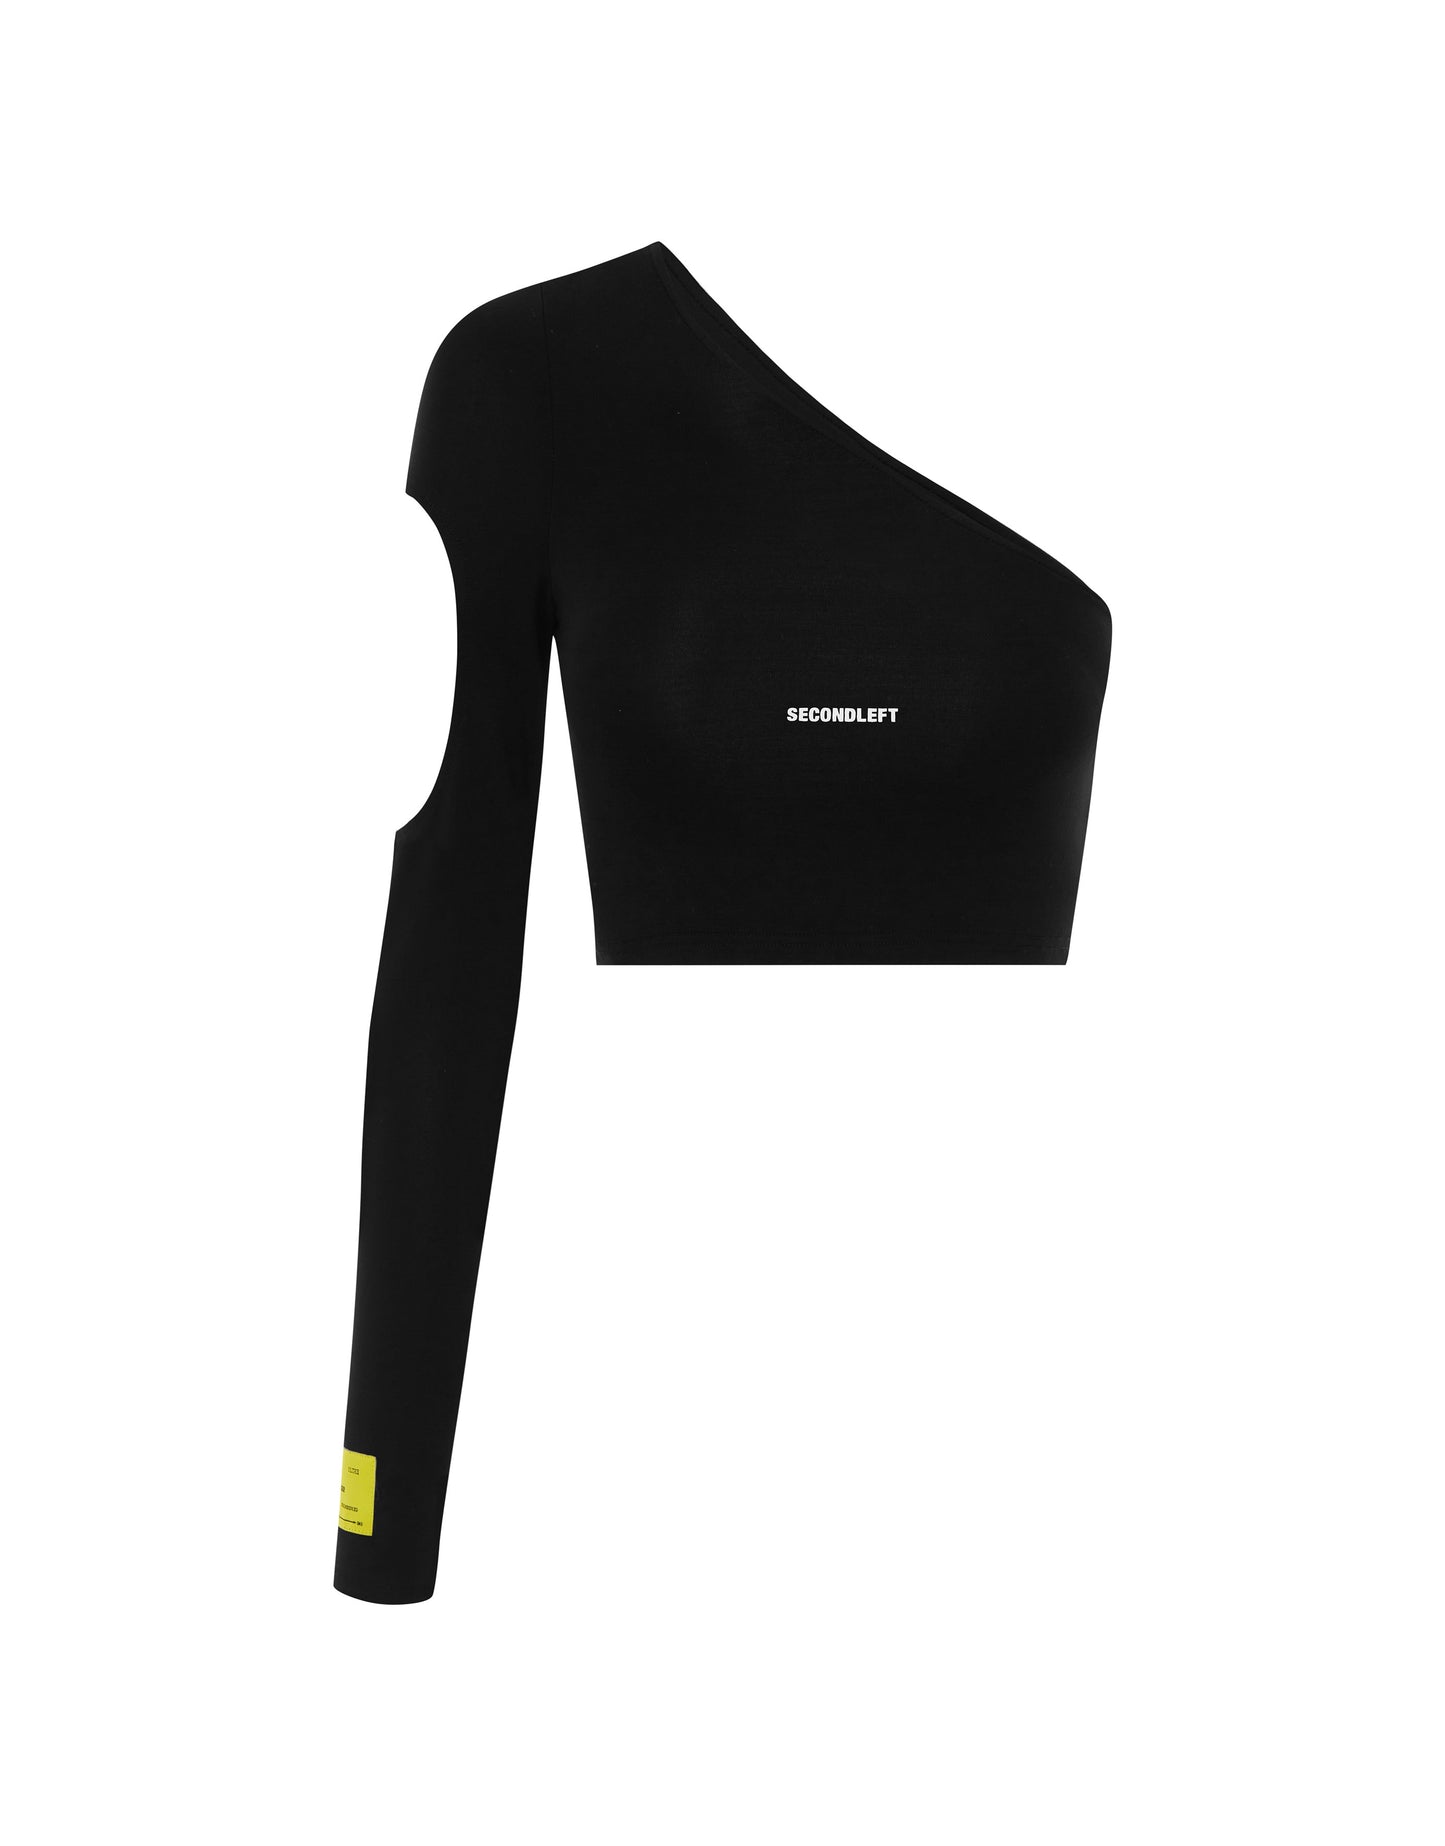 S1 Cut Out Sleeve - Black